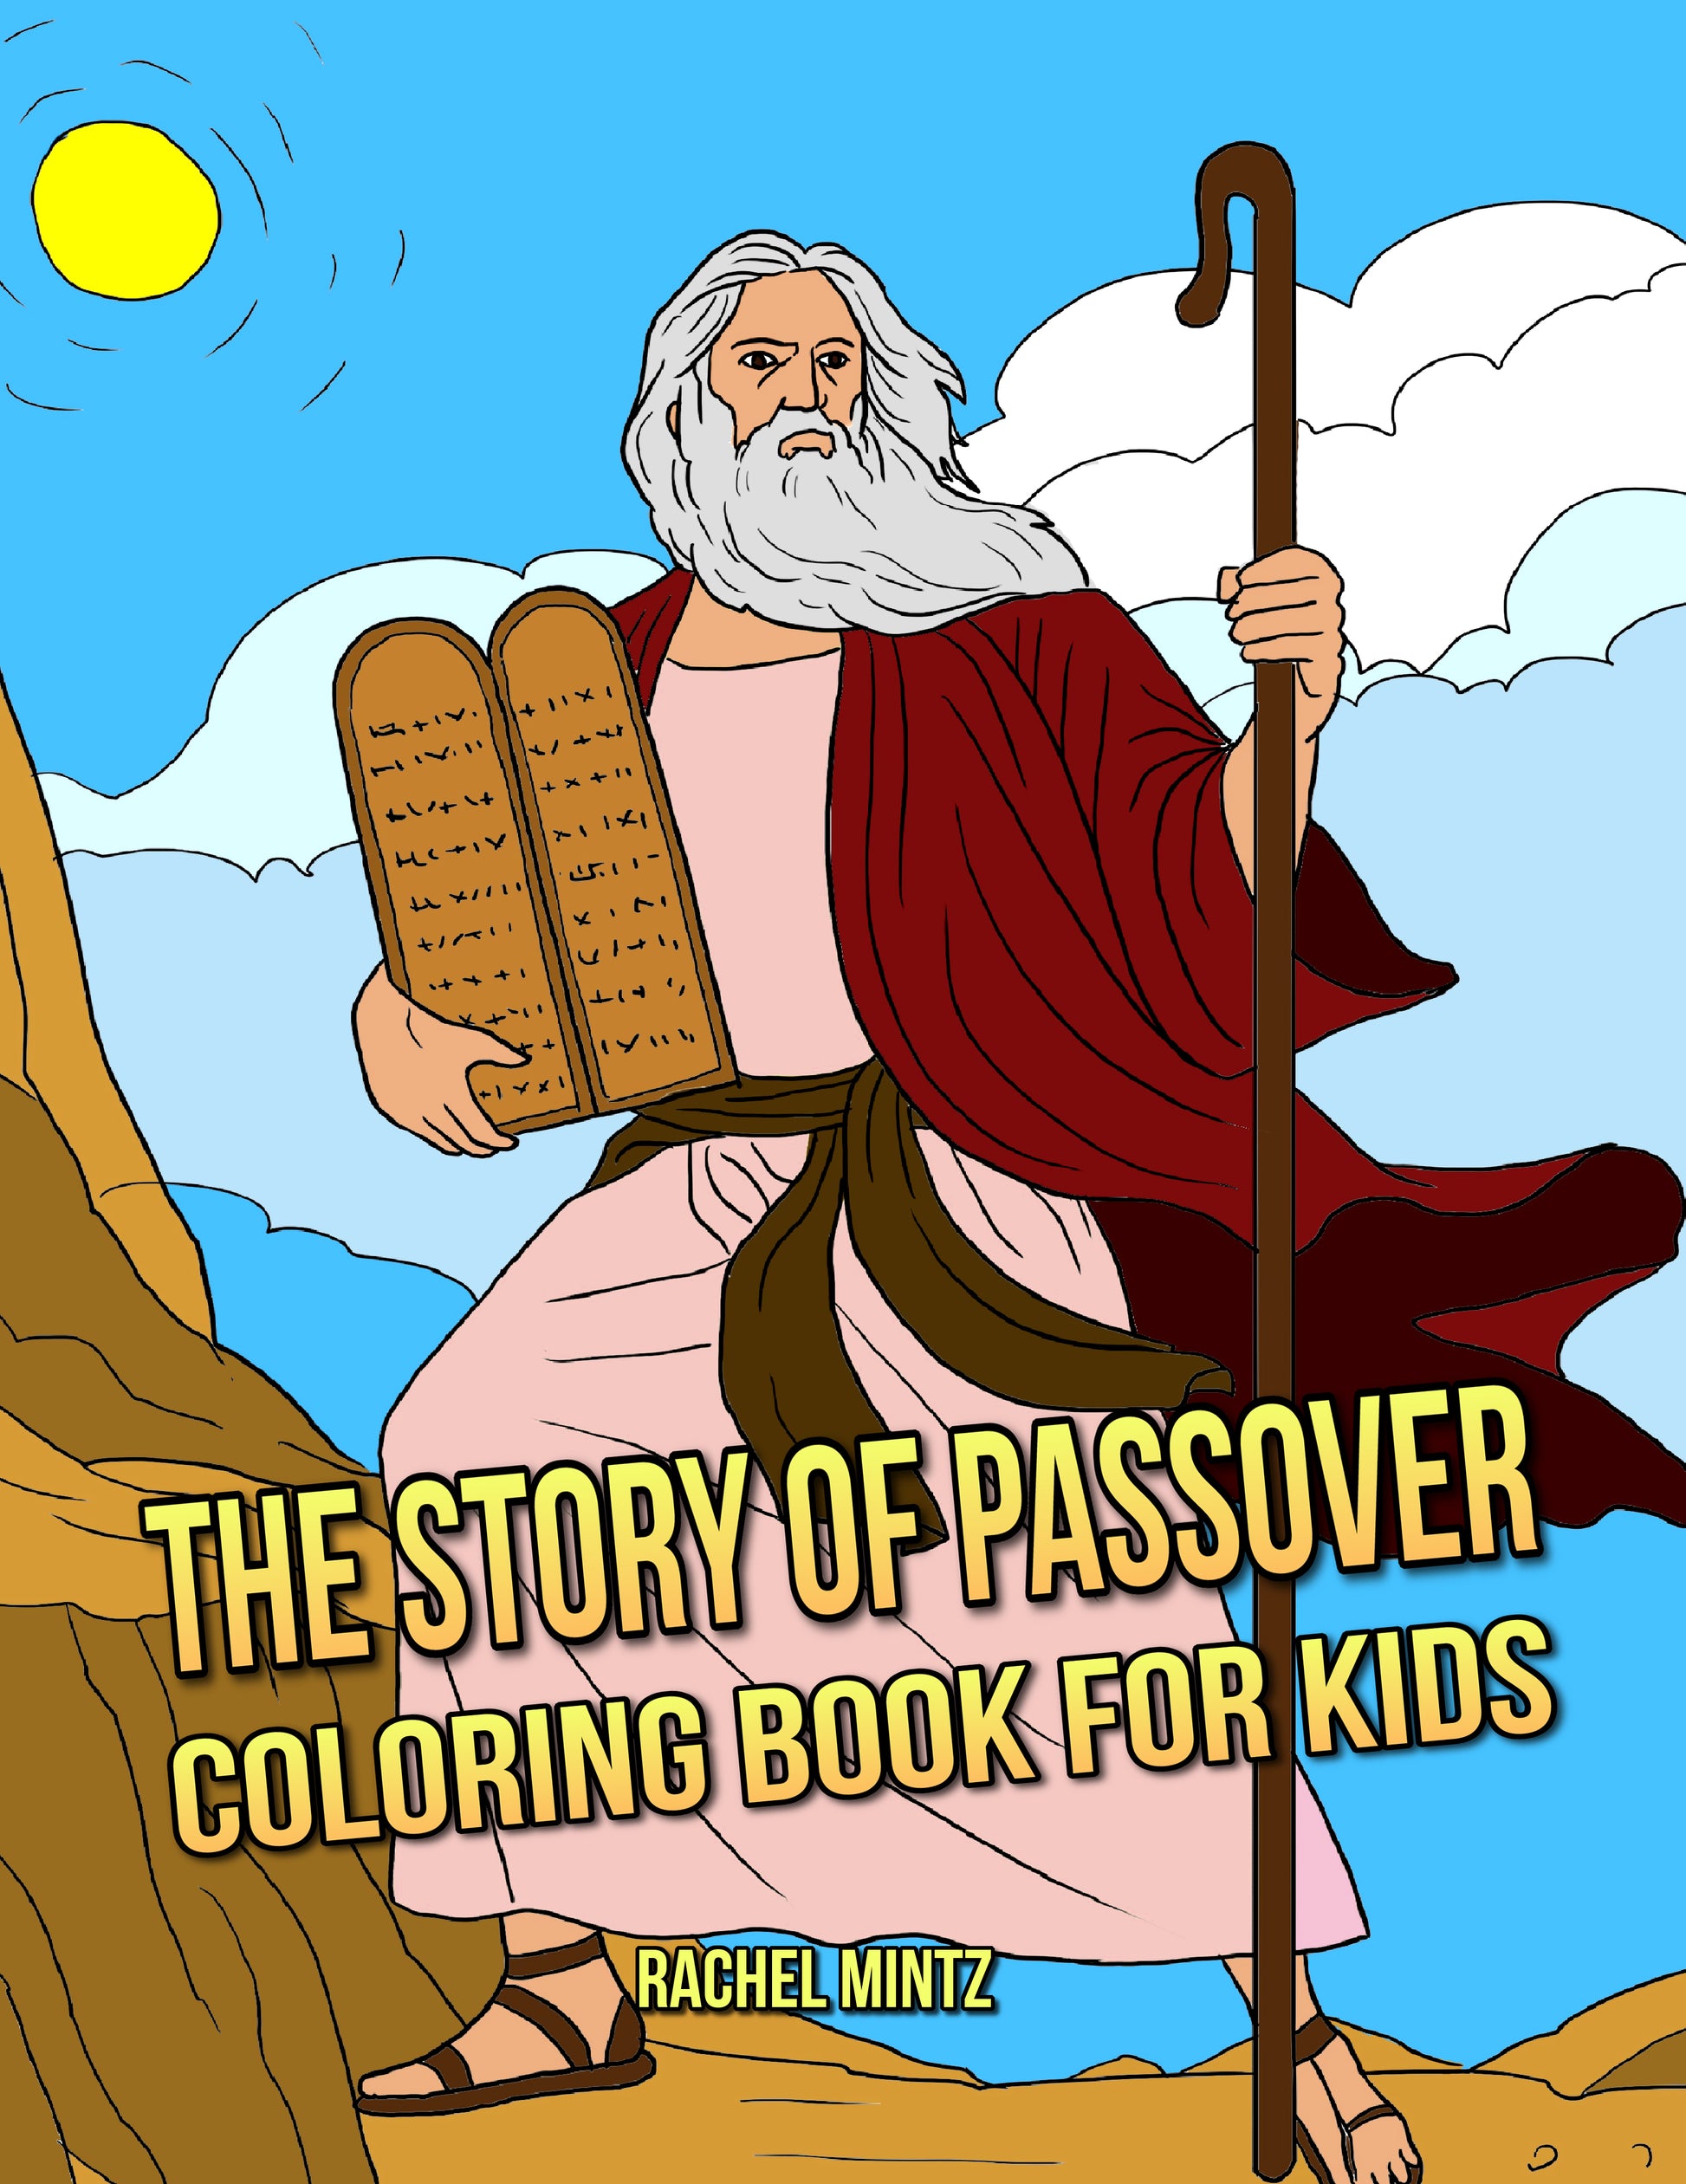 The Story of Passover Coloring Book For Kids - Rachel Mintz